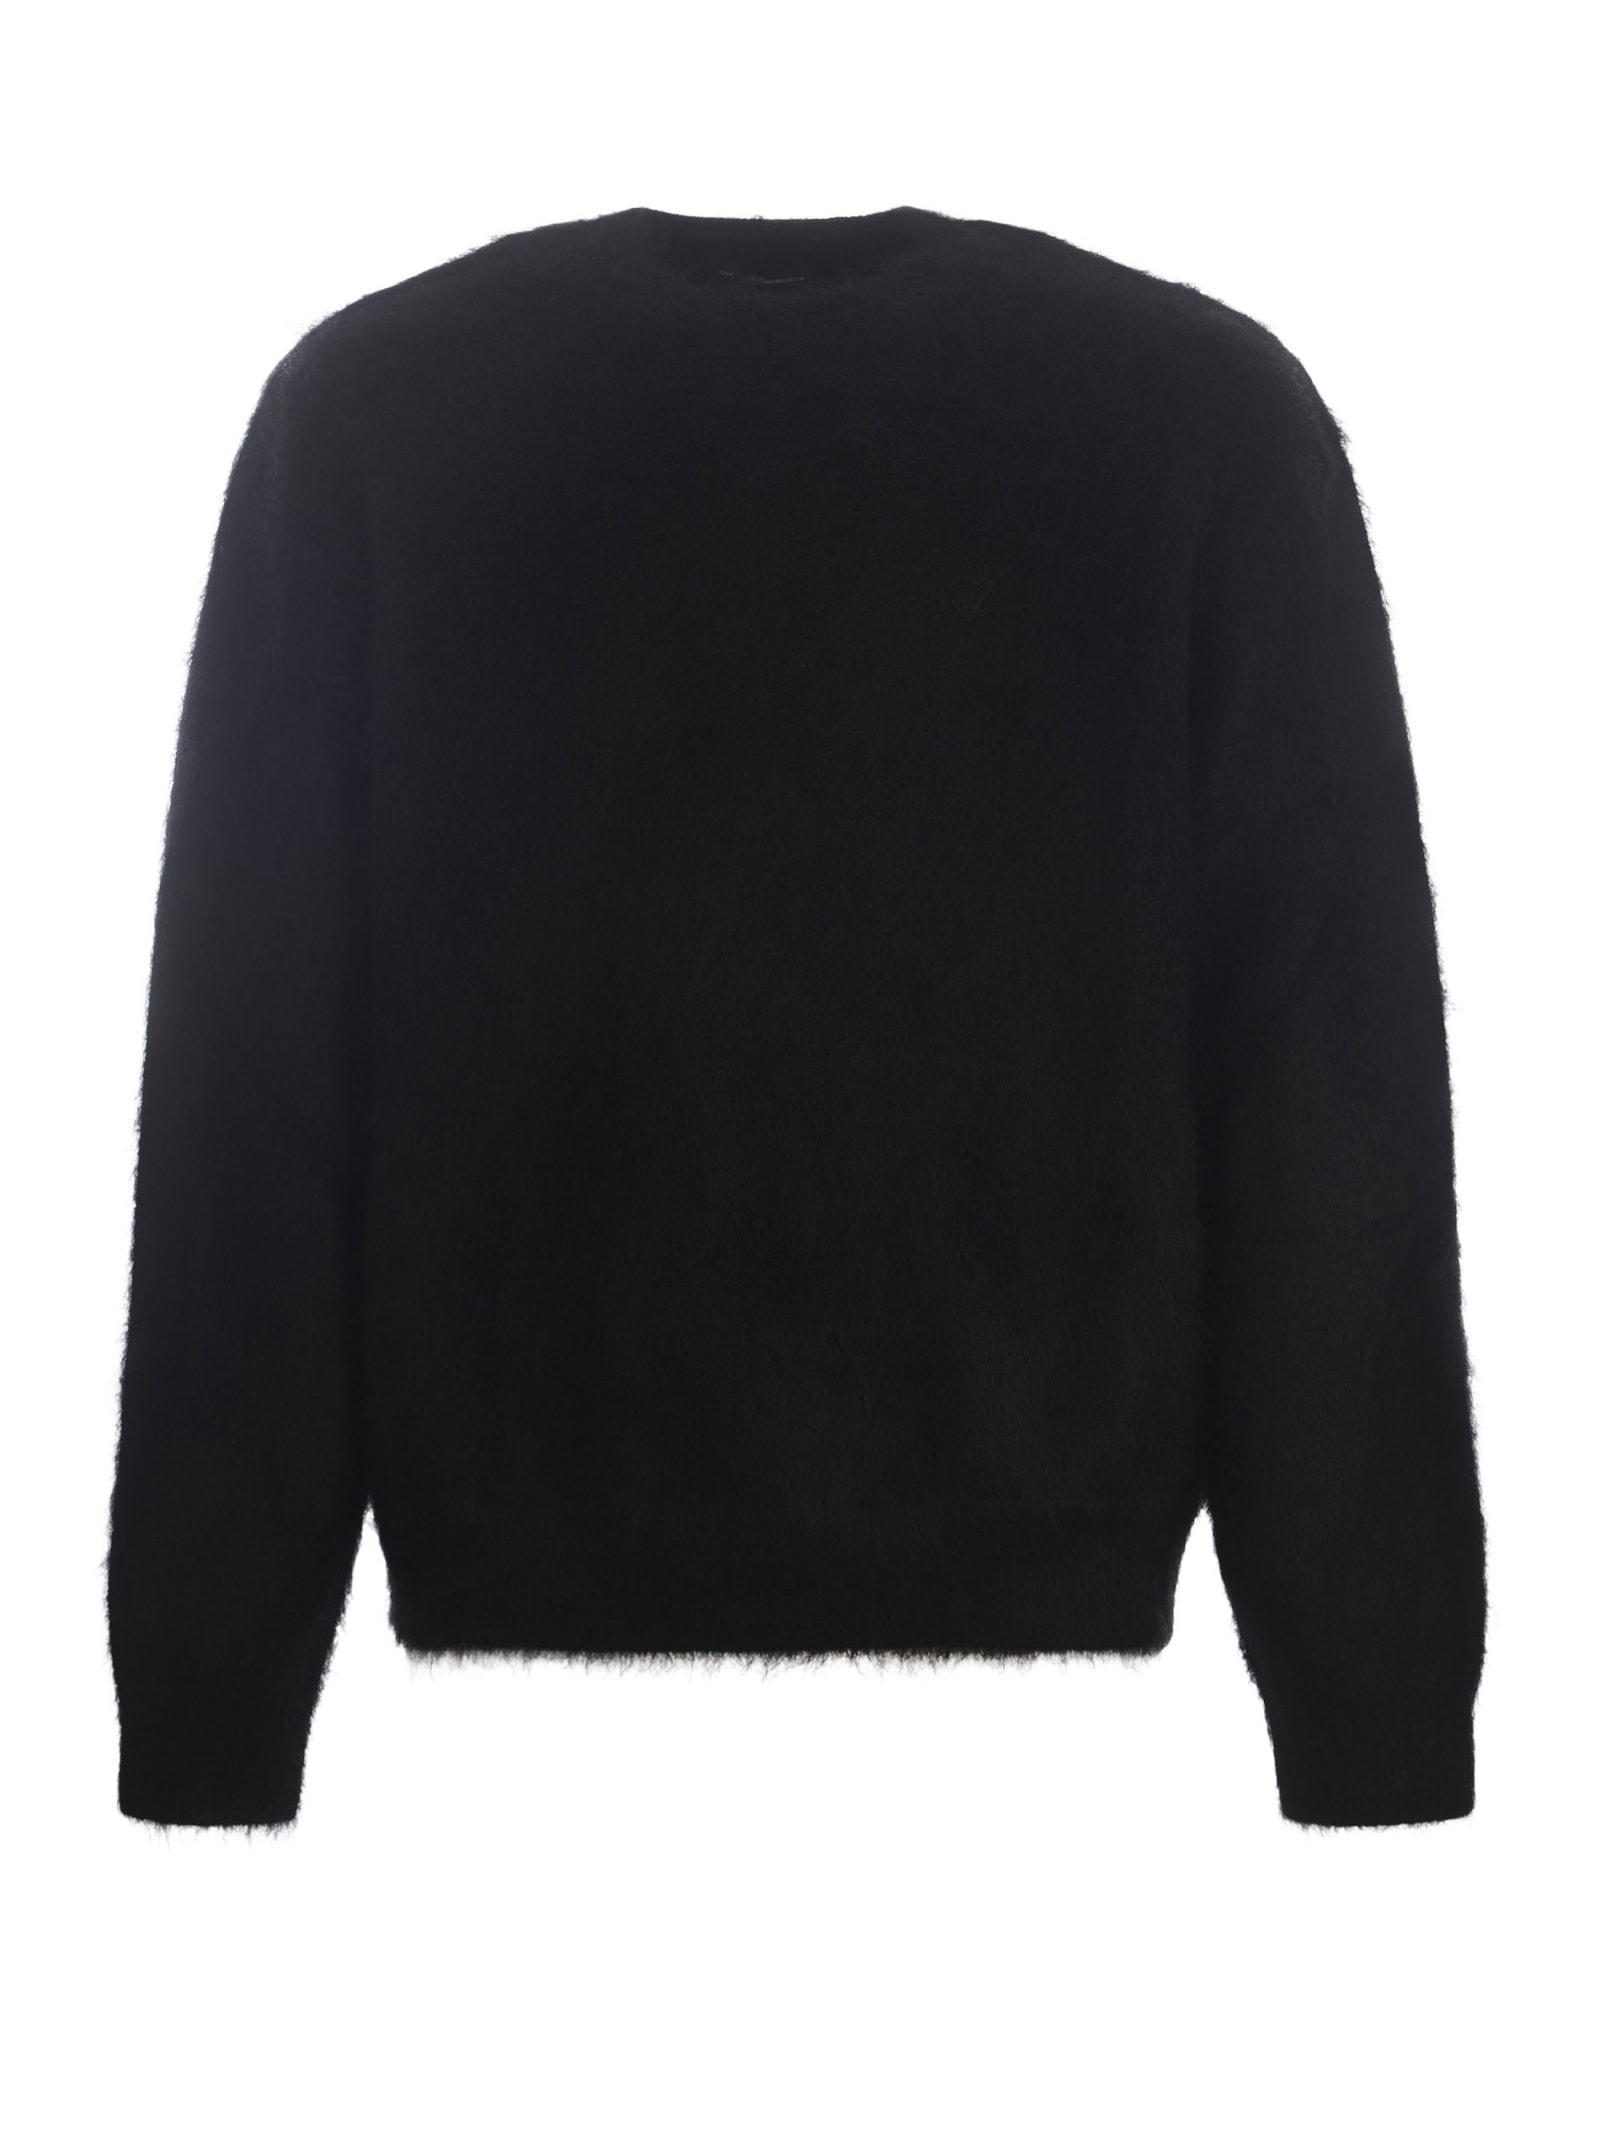 Sweater Axel Arigato primary In Mohair Blend